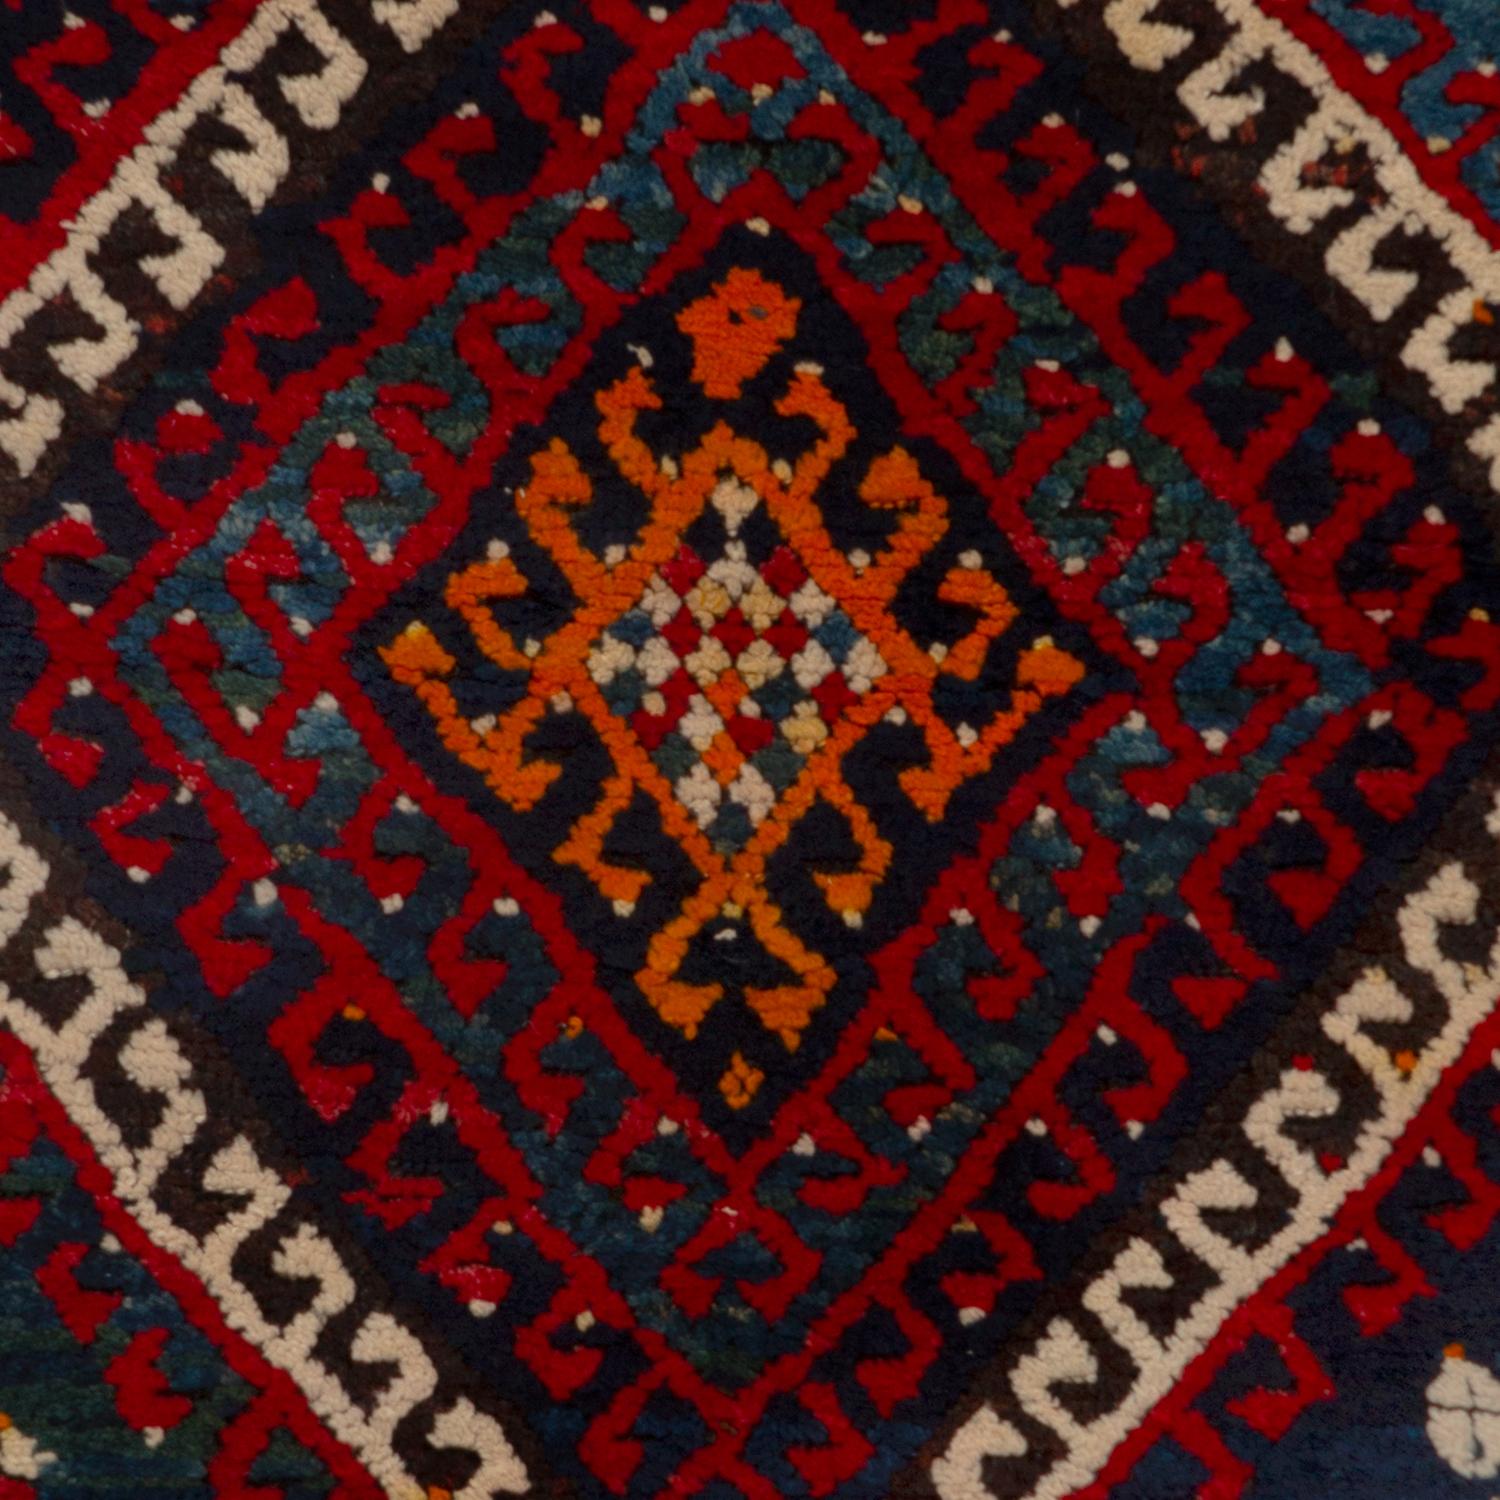 This Vintage Traditional Wool Rug - 4' x 5'2